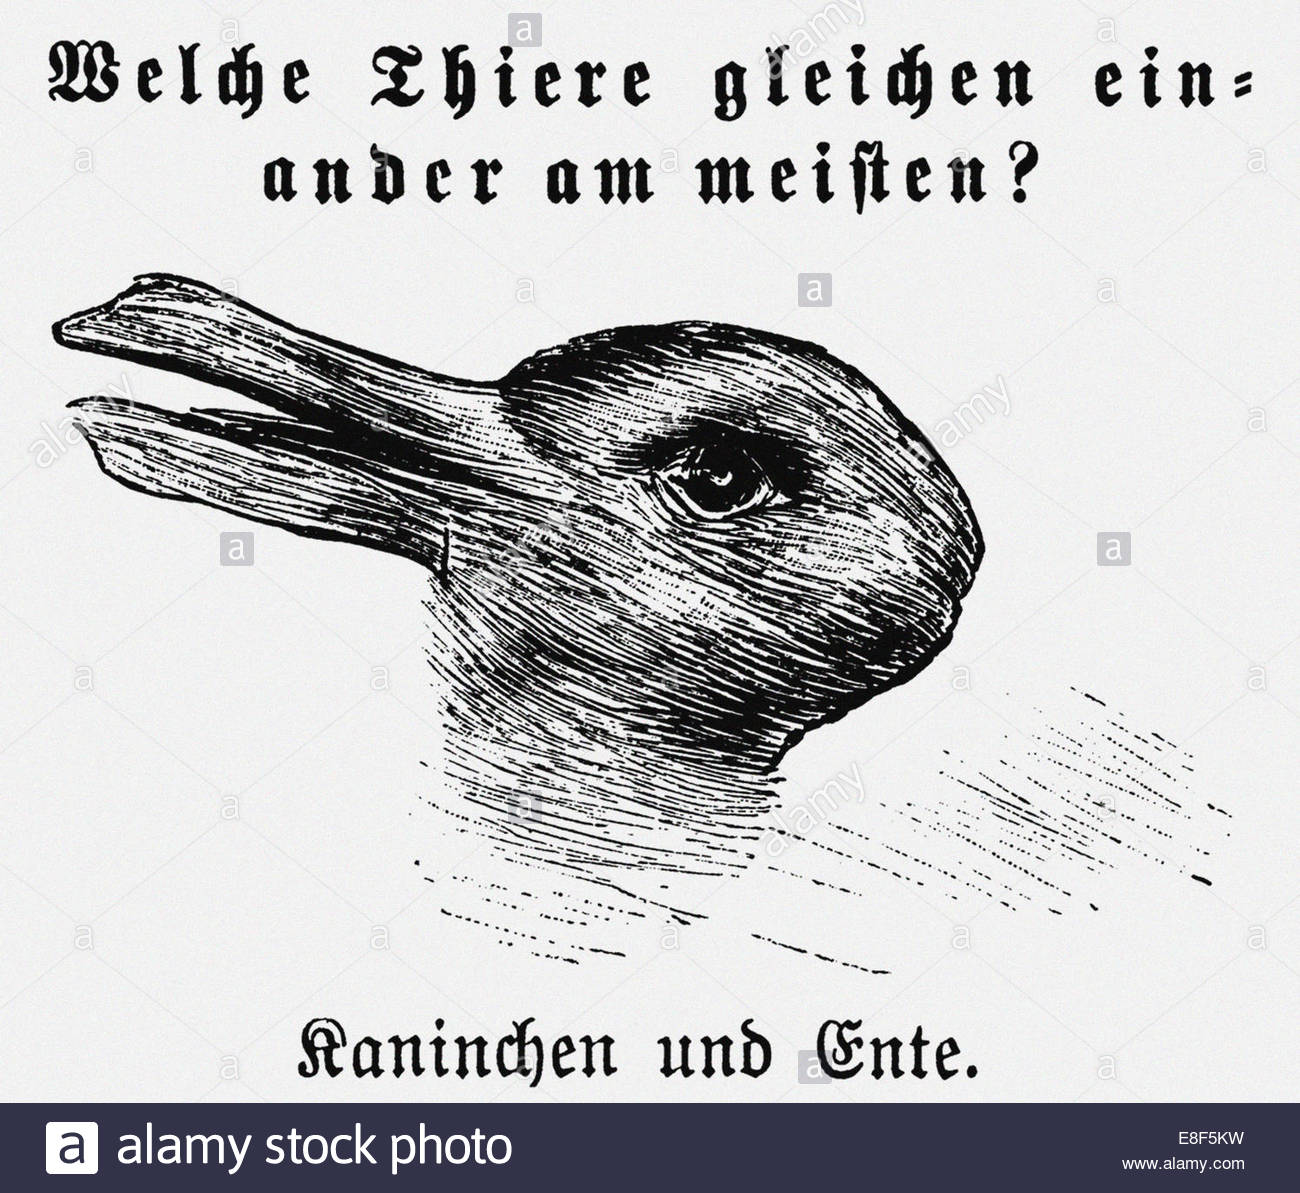 duck-rabbit-illusion-from-jastrow-j-the-